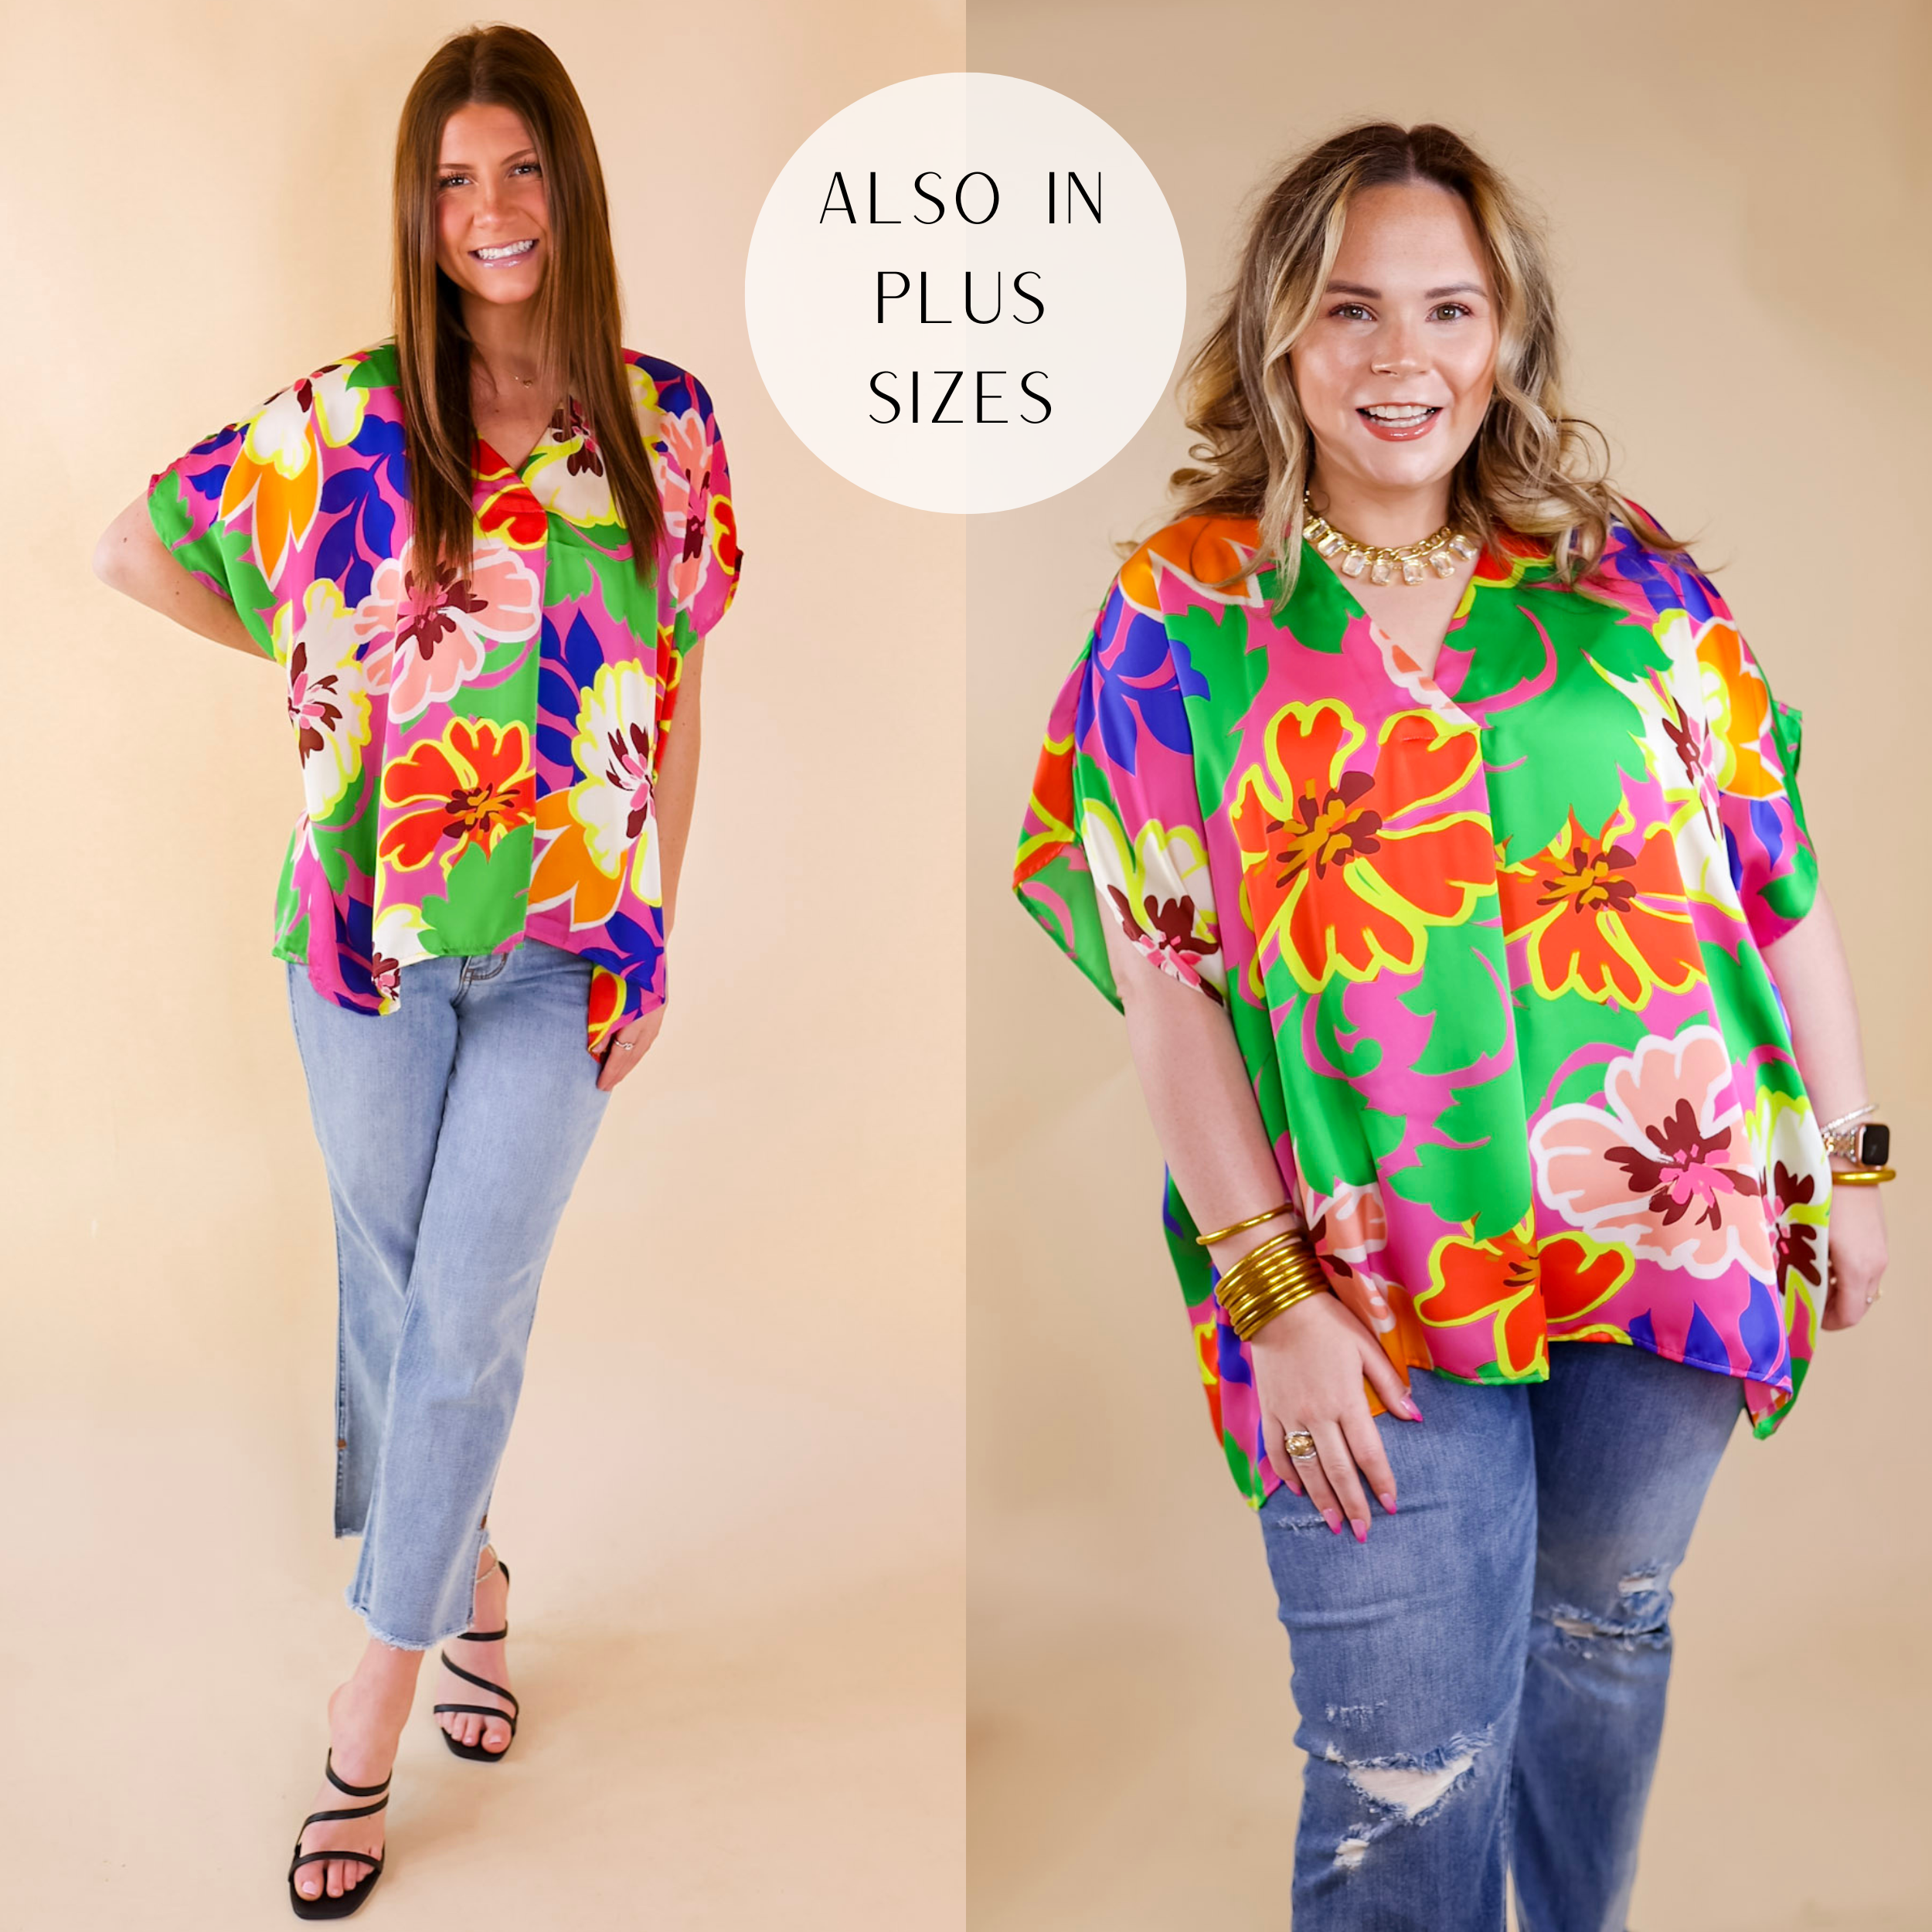 Models are wearing a short sleeve floral top with a v neck and placket. Size small model has this top paired with light wash jeans, black heels, and gold jewelry. Size large model has it paired with gold jewelry and distressed jeans.